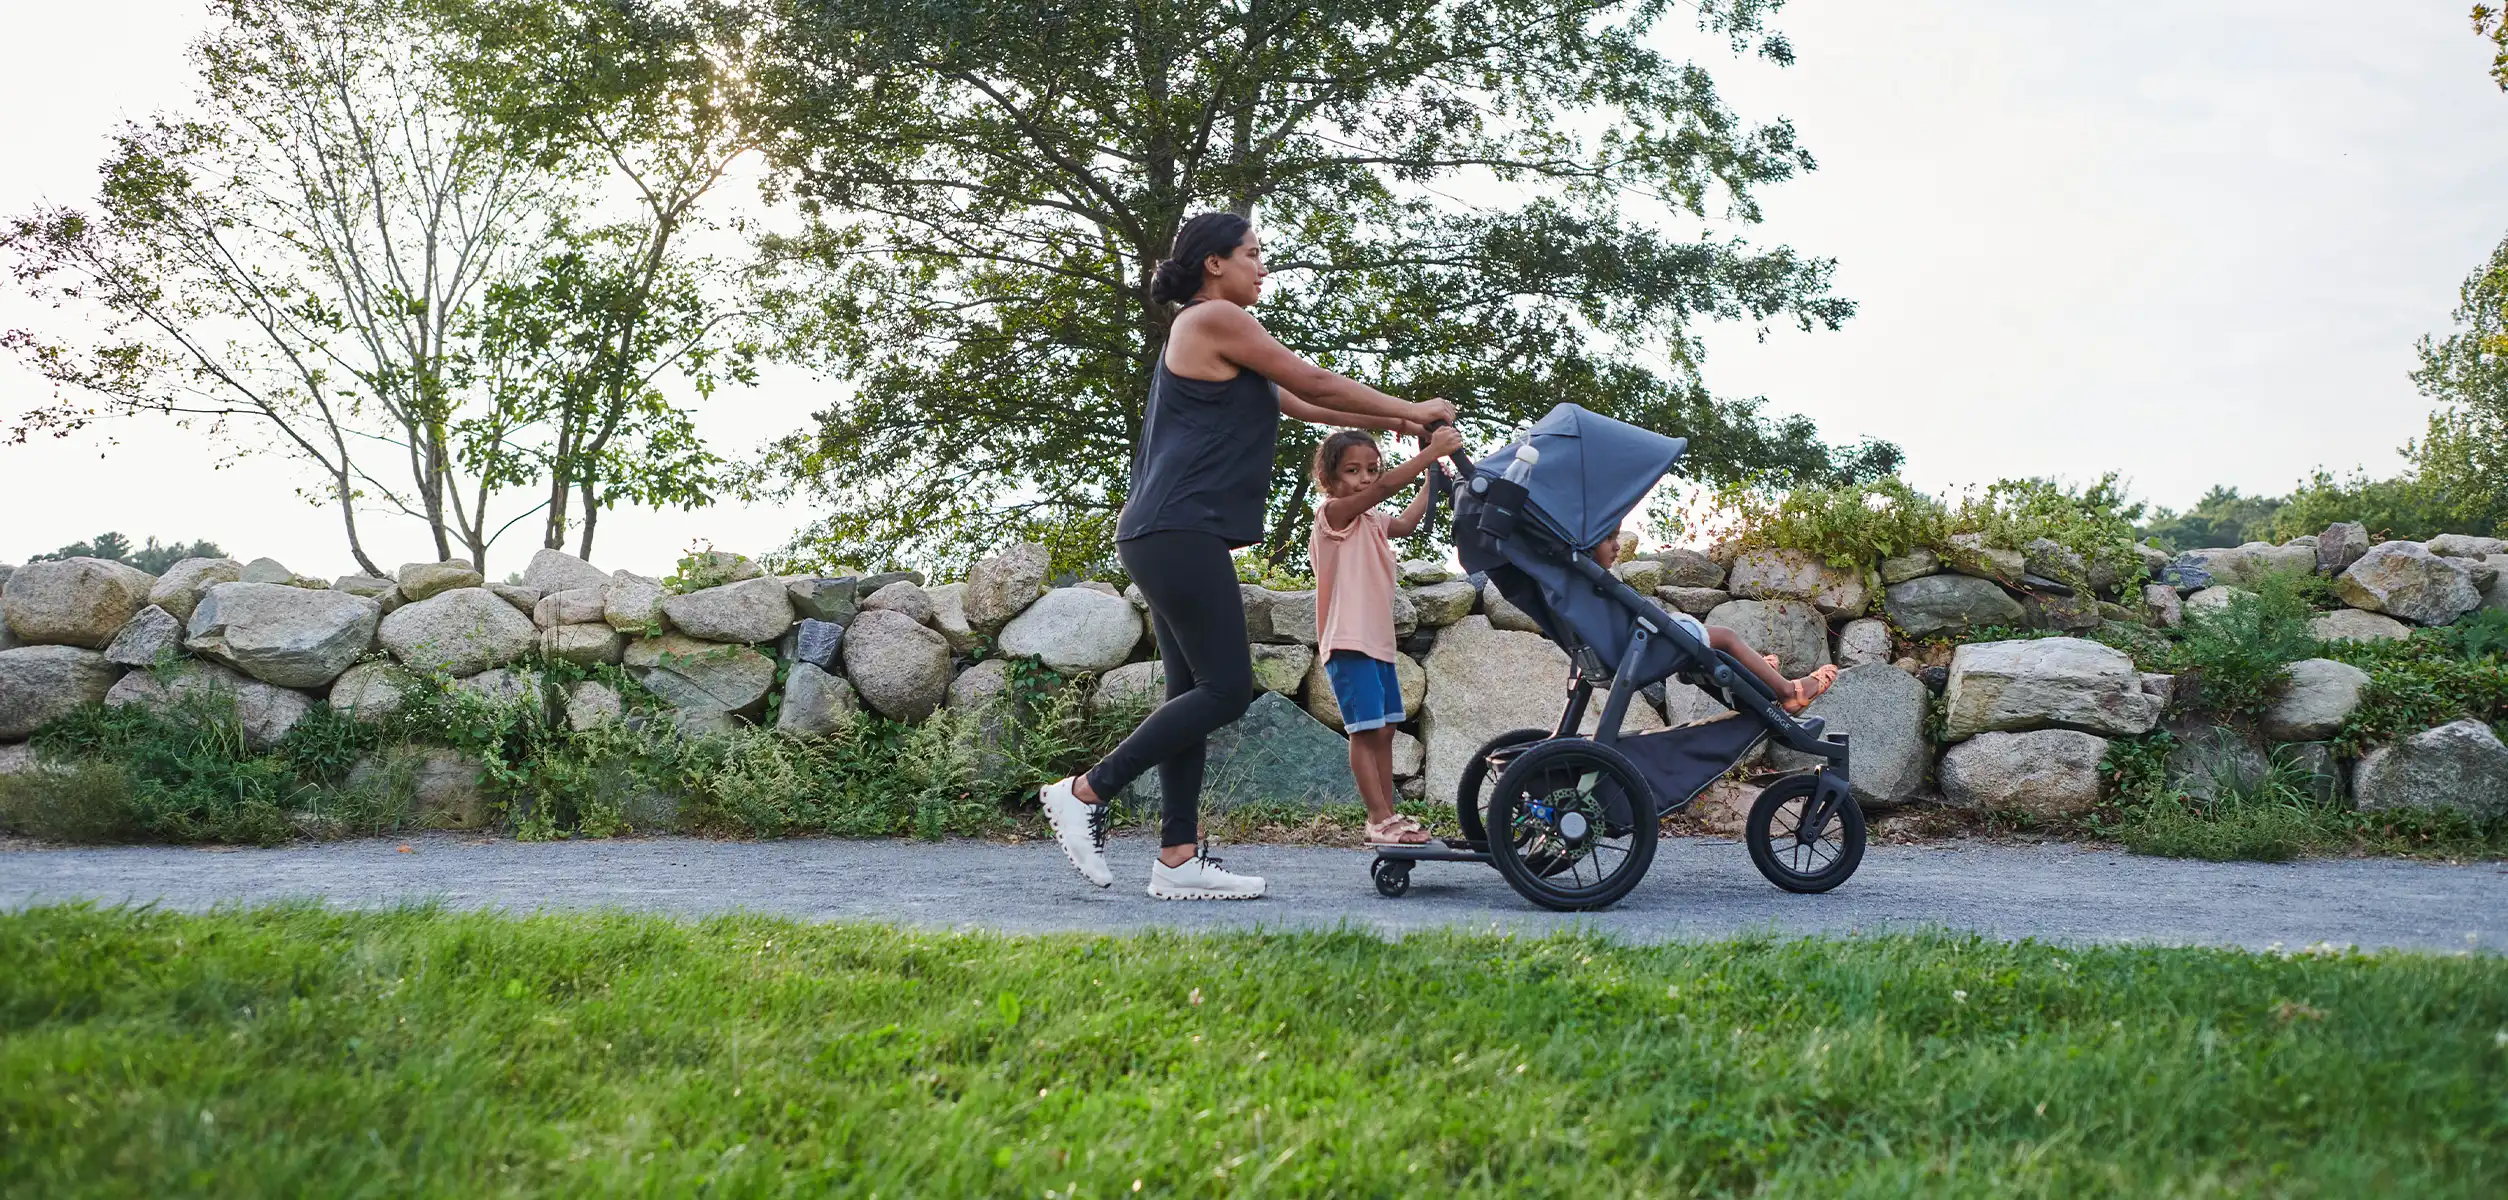 A woman jogs with her two children, one relaxing comfortably in the Ridge, while the other glides along with the help of the Piggyback Accessory that attaches directly to the stroller